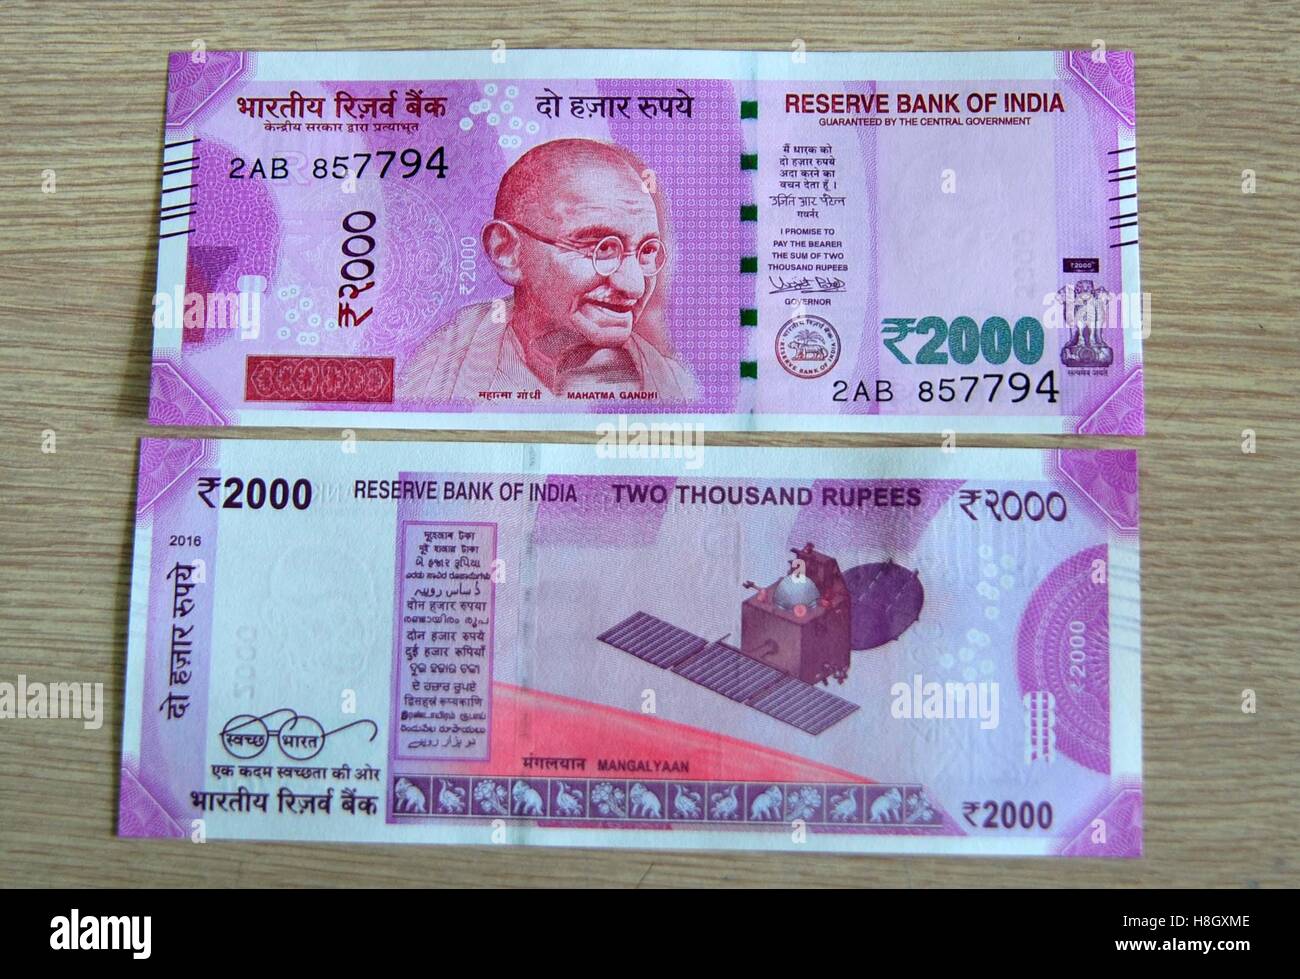 Allahabad, uttar pradesh, India. 12th Nov, 2016. Gandhi portait on newly launched 2000 rupee currency notes in Allahabad. © Prabhat Kumar Verma/ZUMA Wire/Alamy Live News Stock Photo